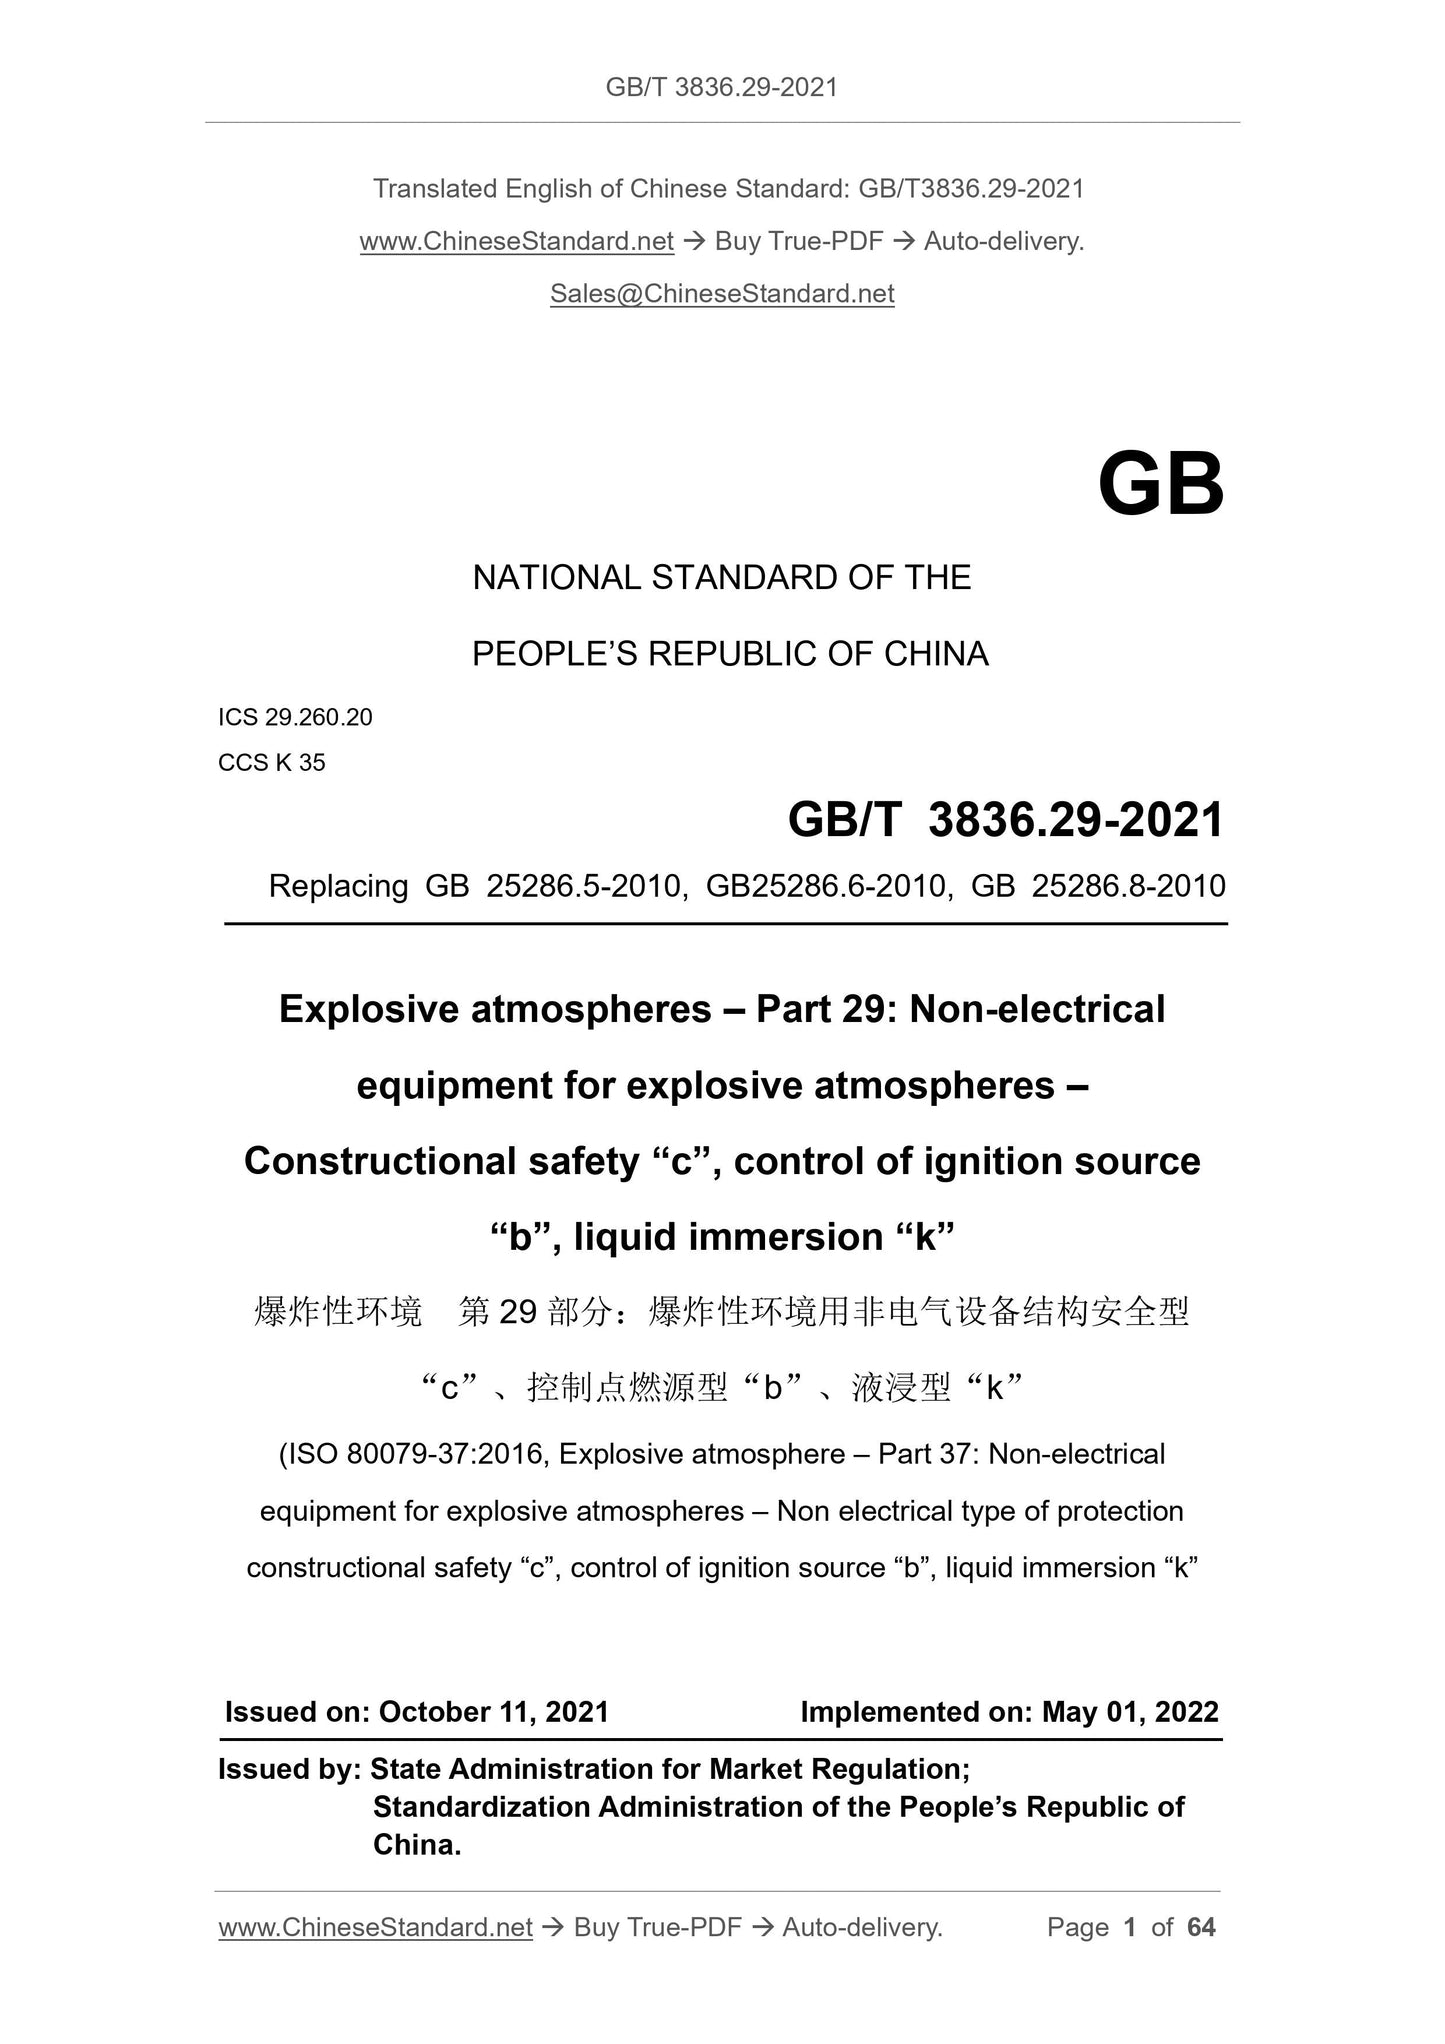 GB/T 3836.29-2021 Page 1